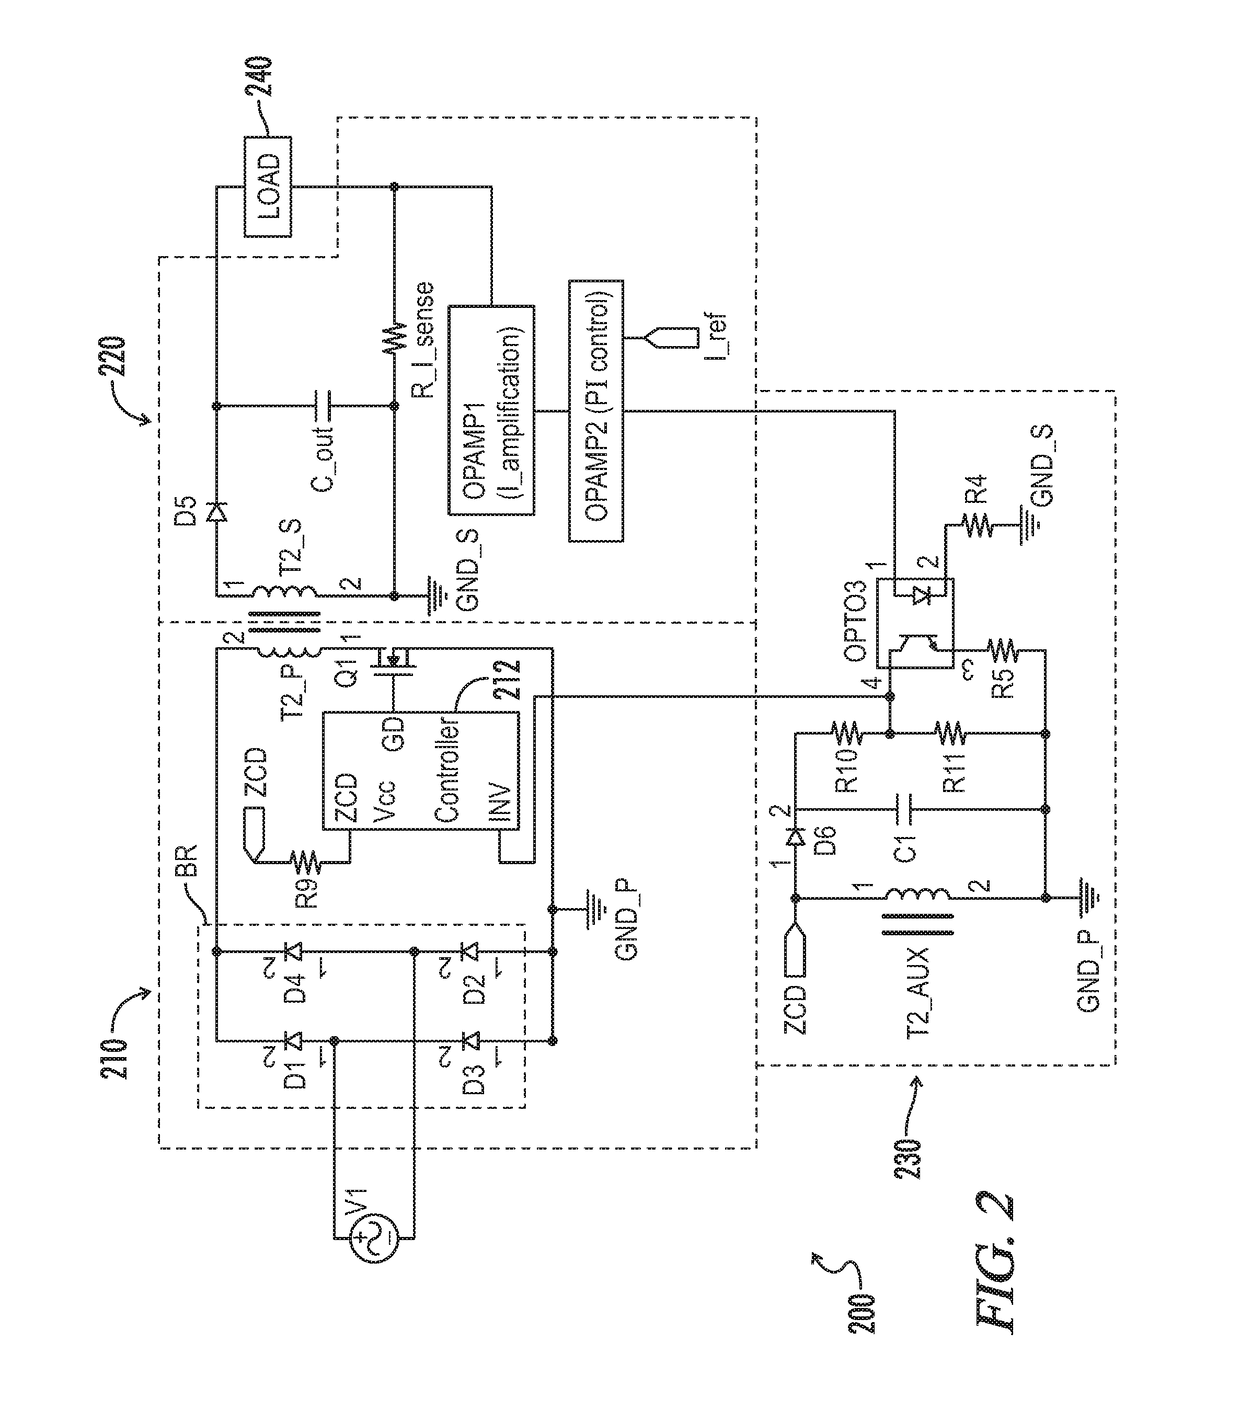 Current and voltage control circuit and method for a class II LED driver